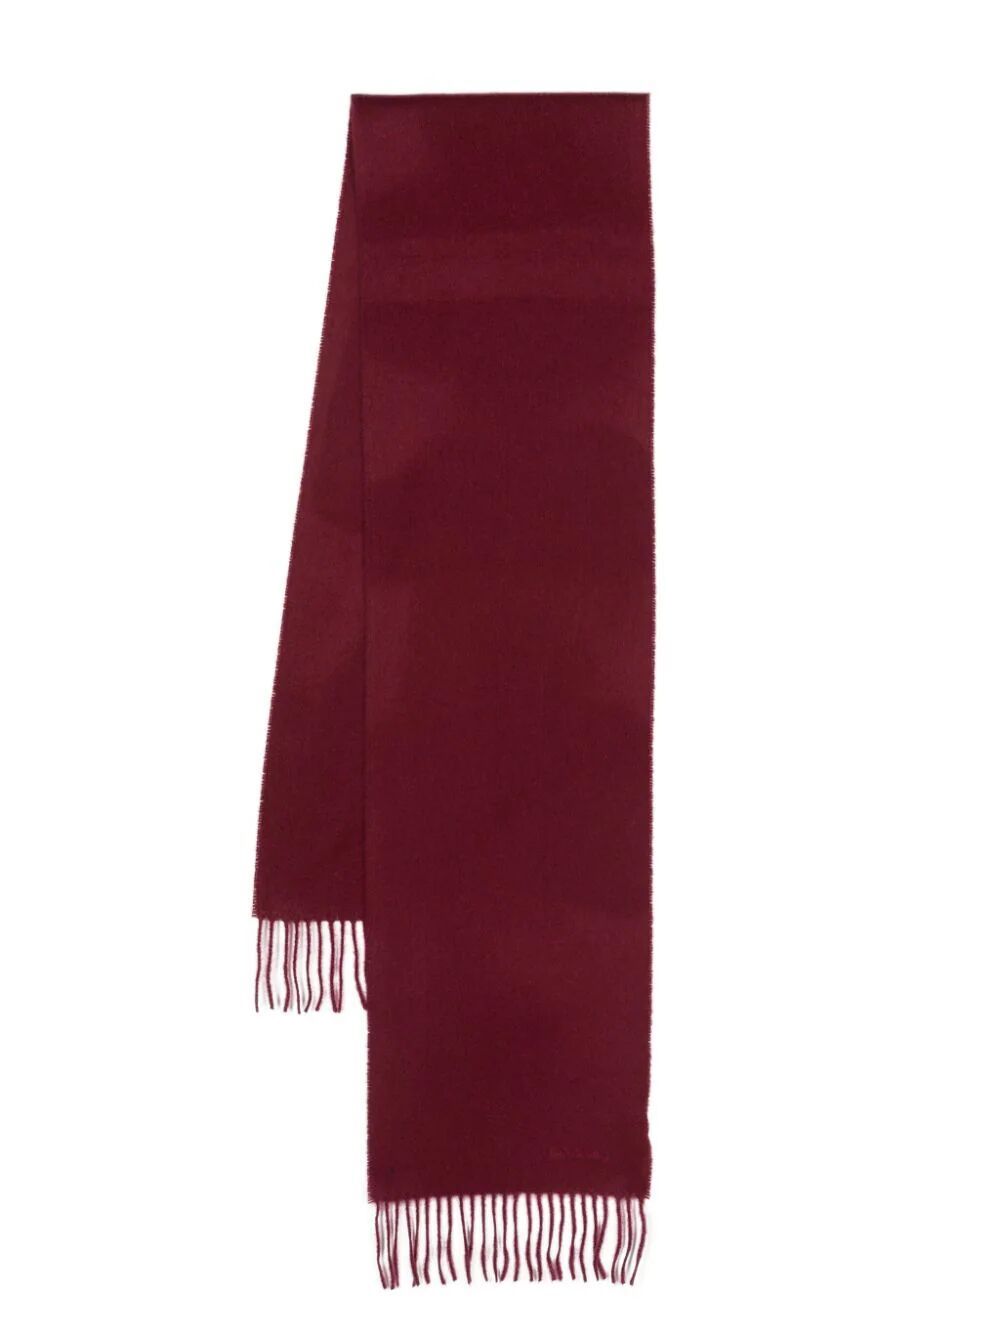 Paul Smith Men Scarf Pln Cashmere Ssnl In Red